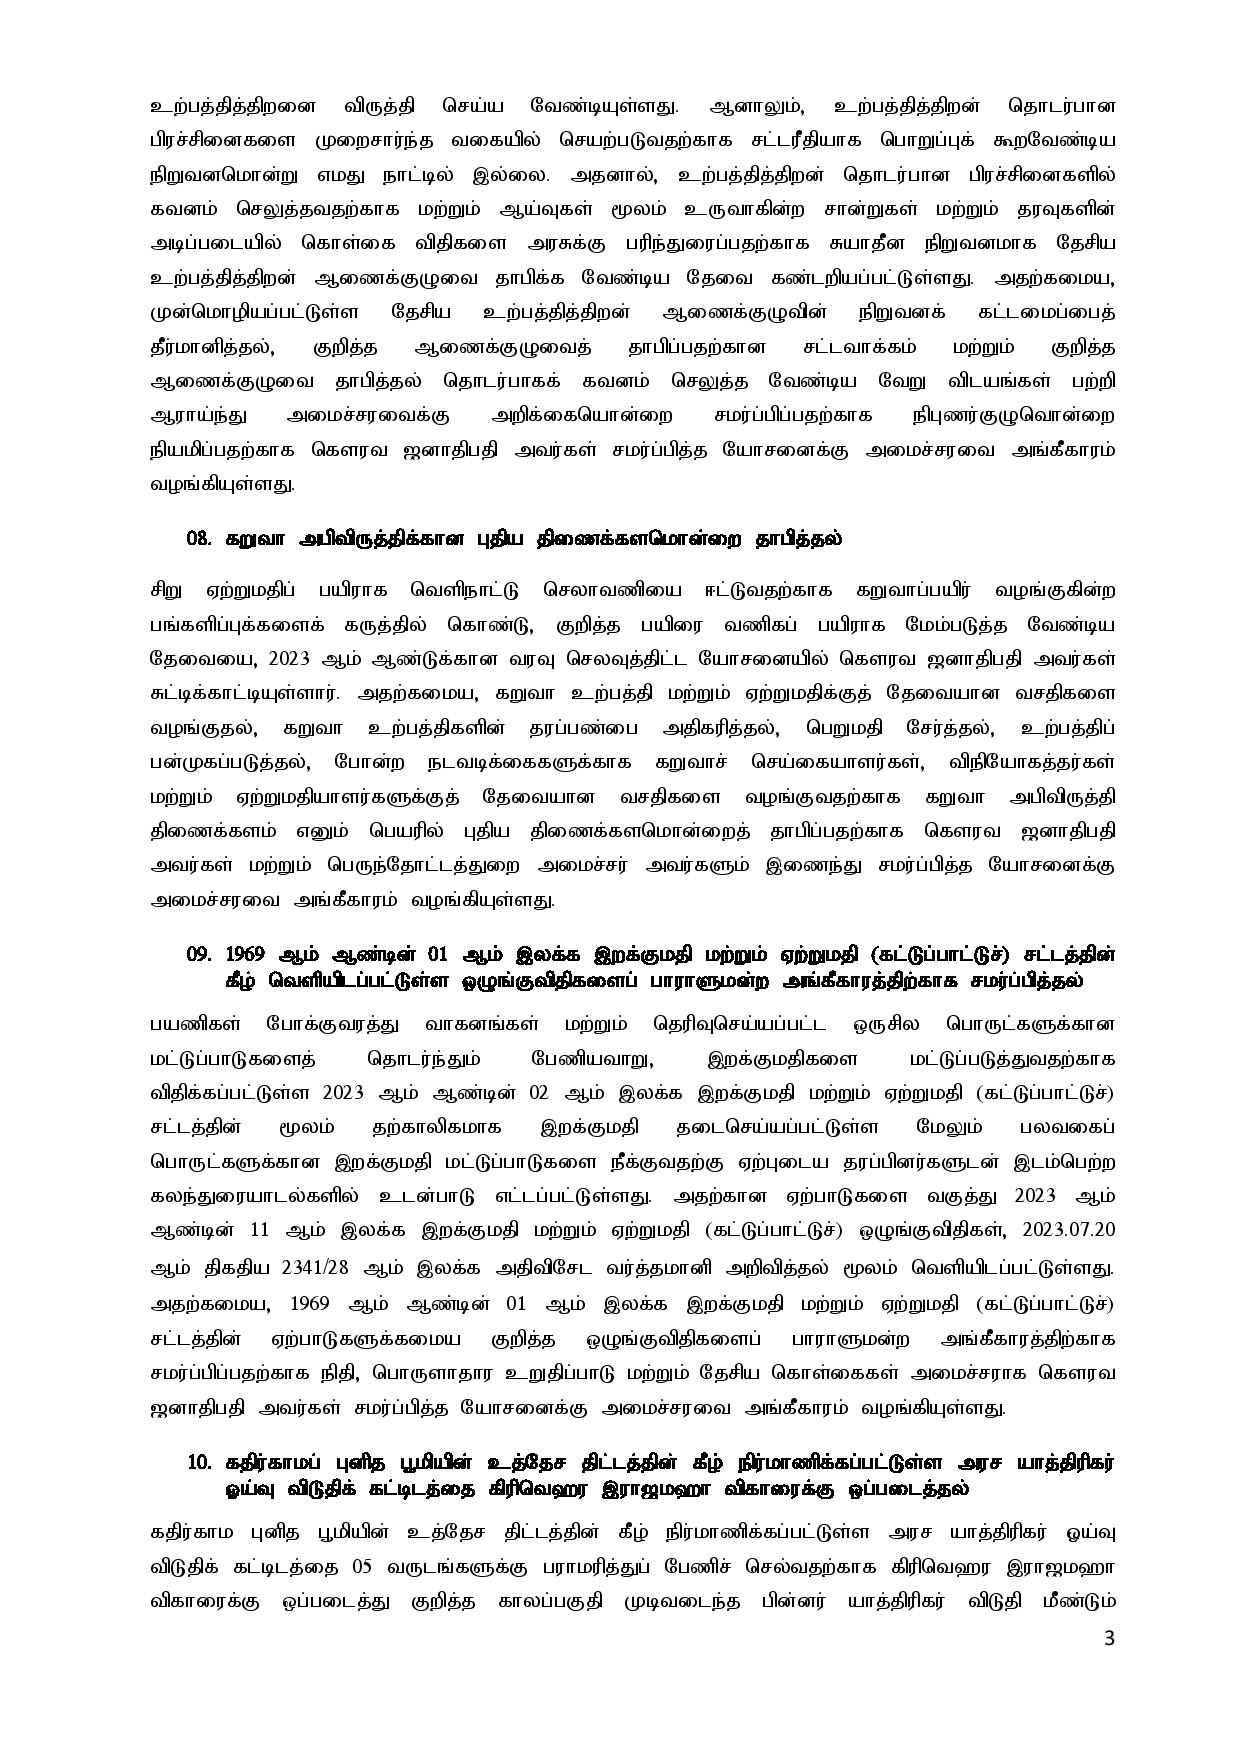 Cabinet Decisions on 14.08.2023 Tamil page 003